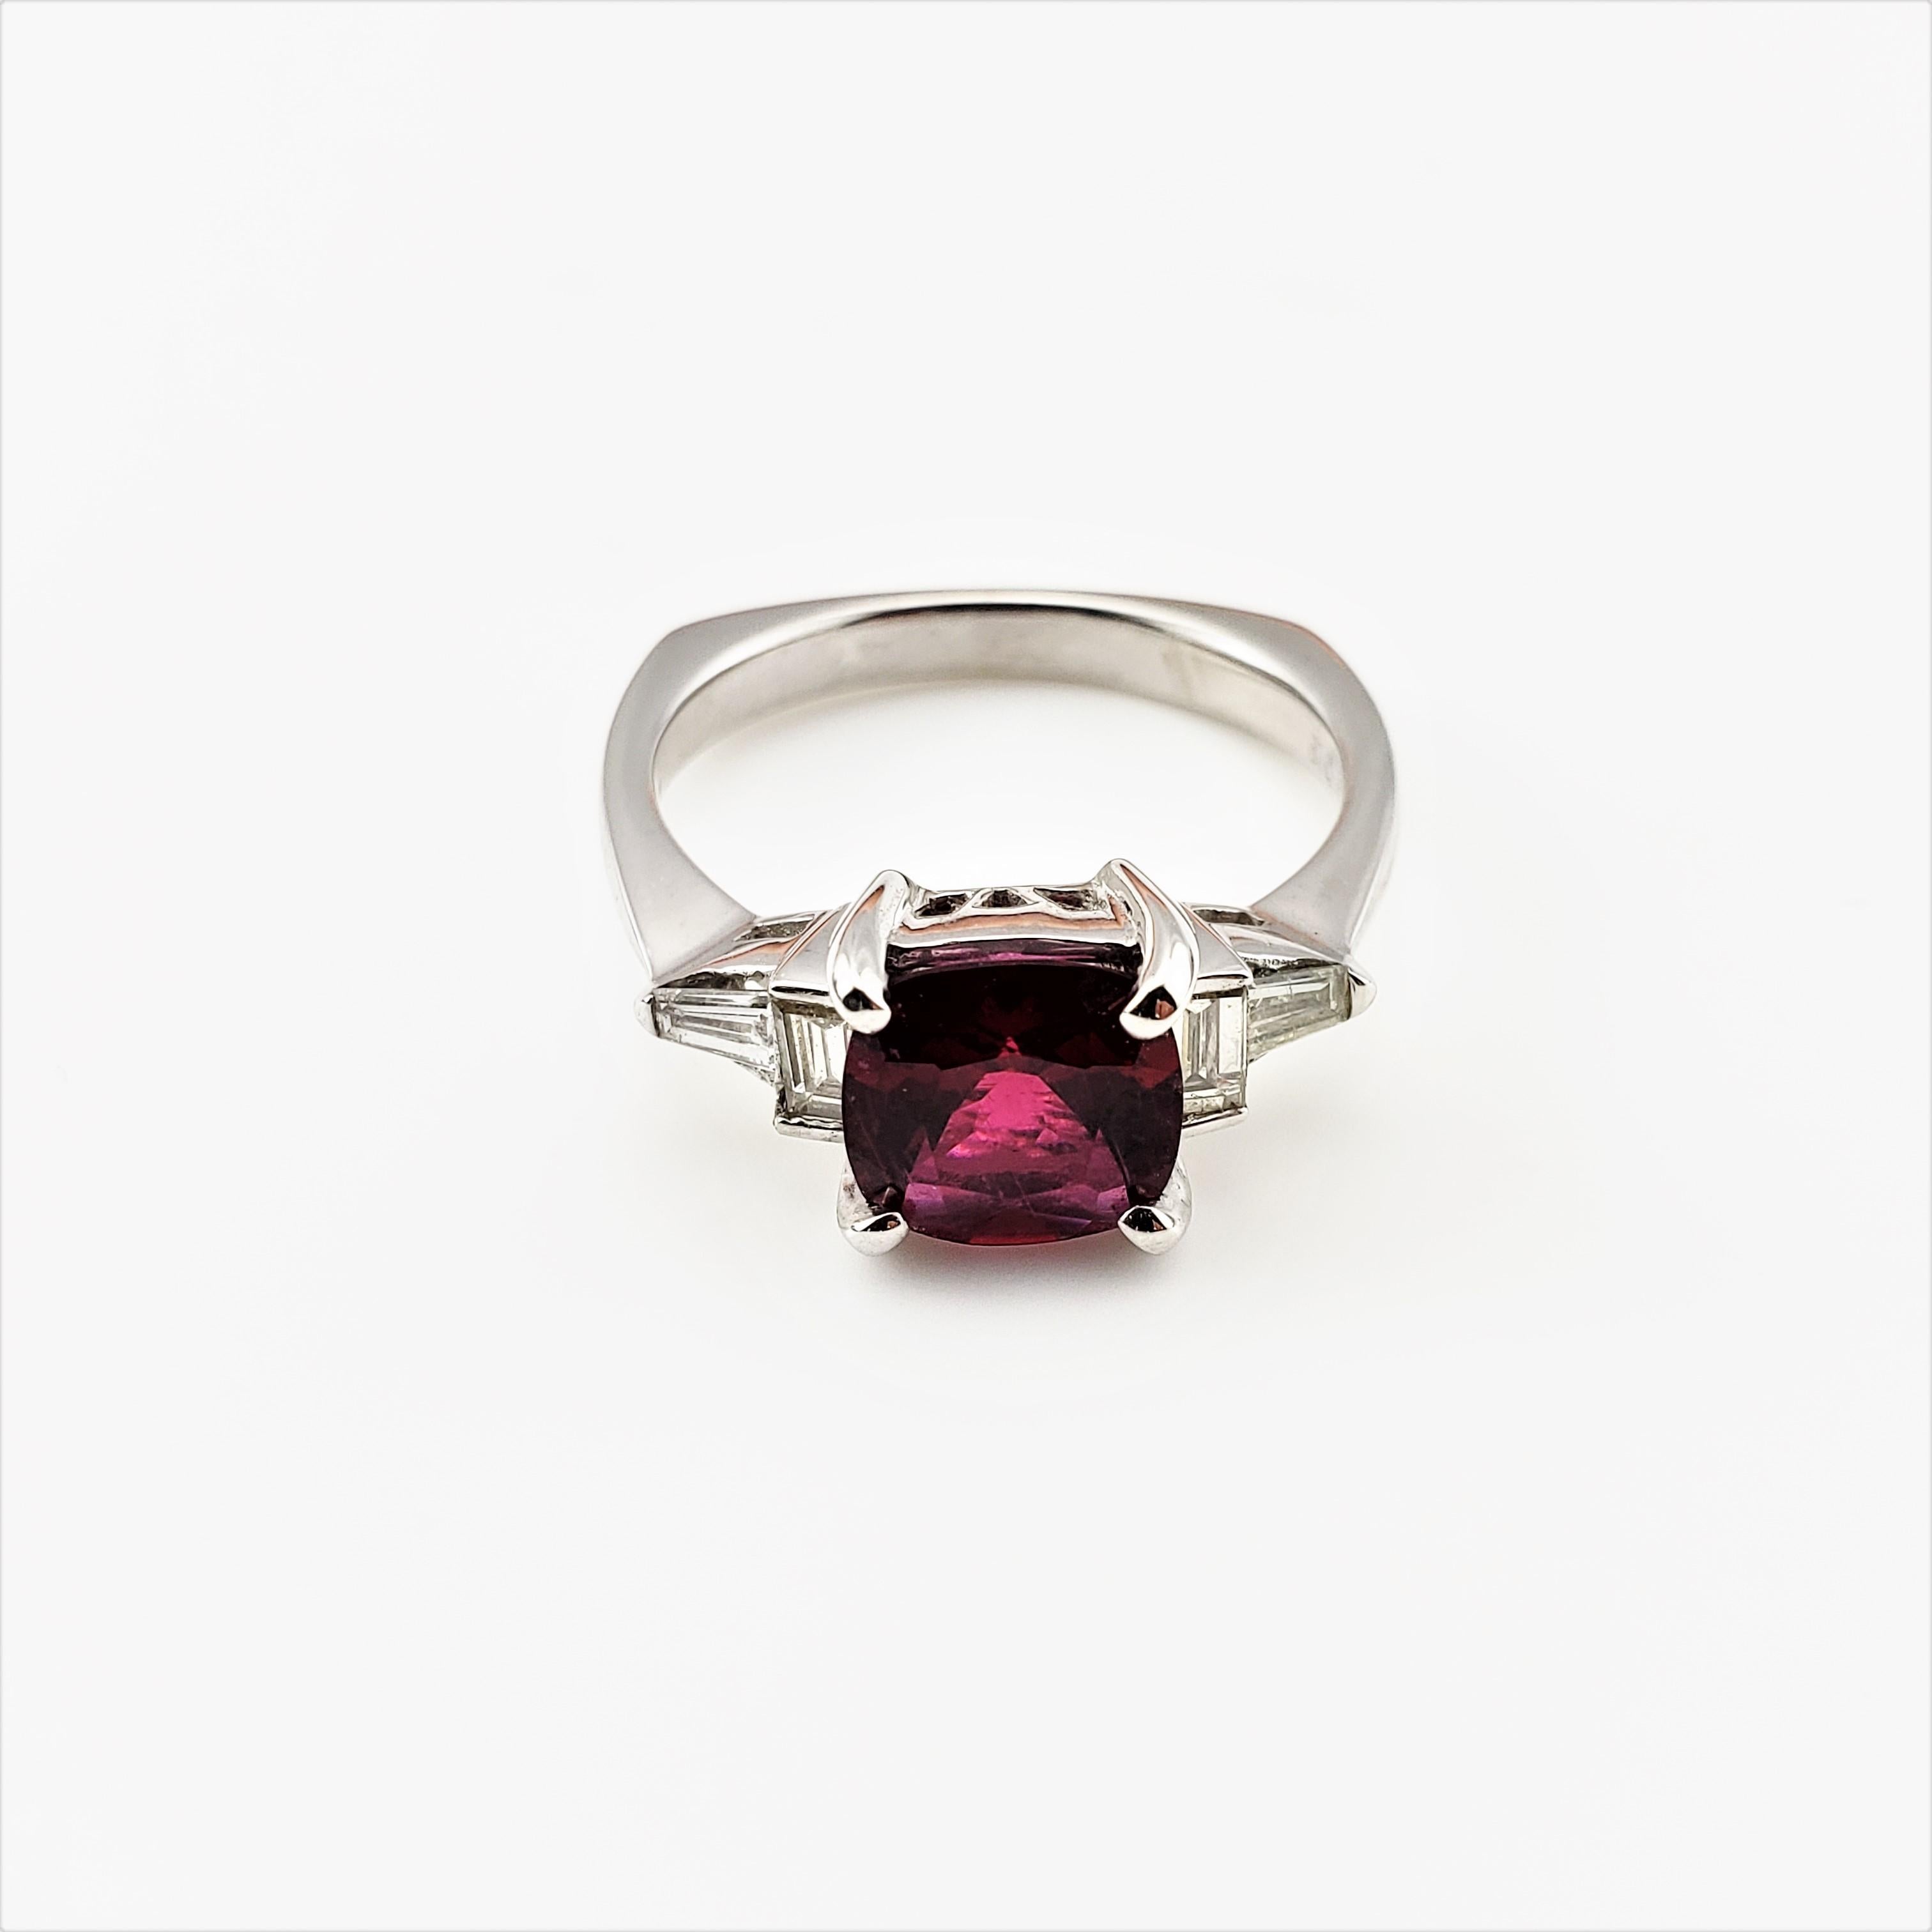 Vintage 14 Karat White Gold Garnet and Diamond Ring Size 9 GAI Certified-

This stunning ring features one cushion cut red garnet (8 mm x 8 mm) and four baguette diamonds set in elegant 14K white gold.
Shank:  3 mm.

Total diamond weight:  .60